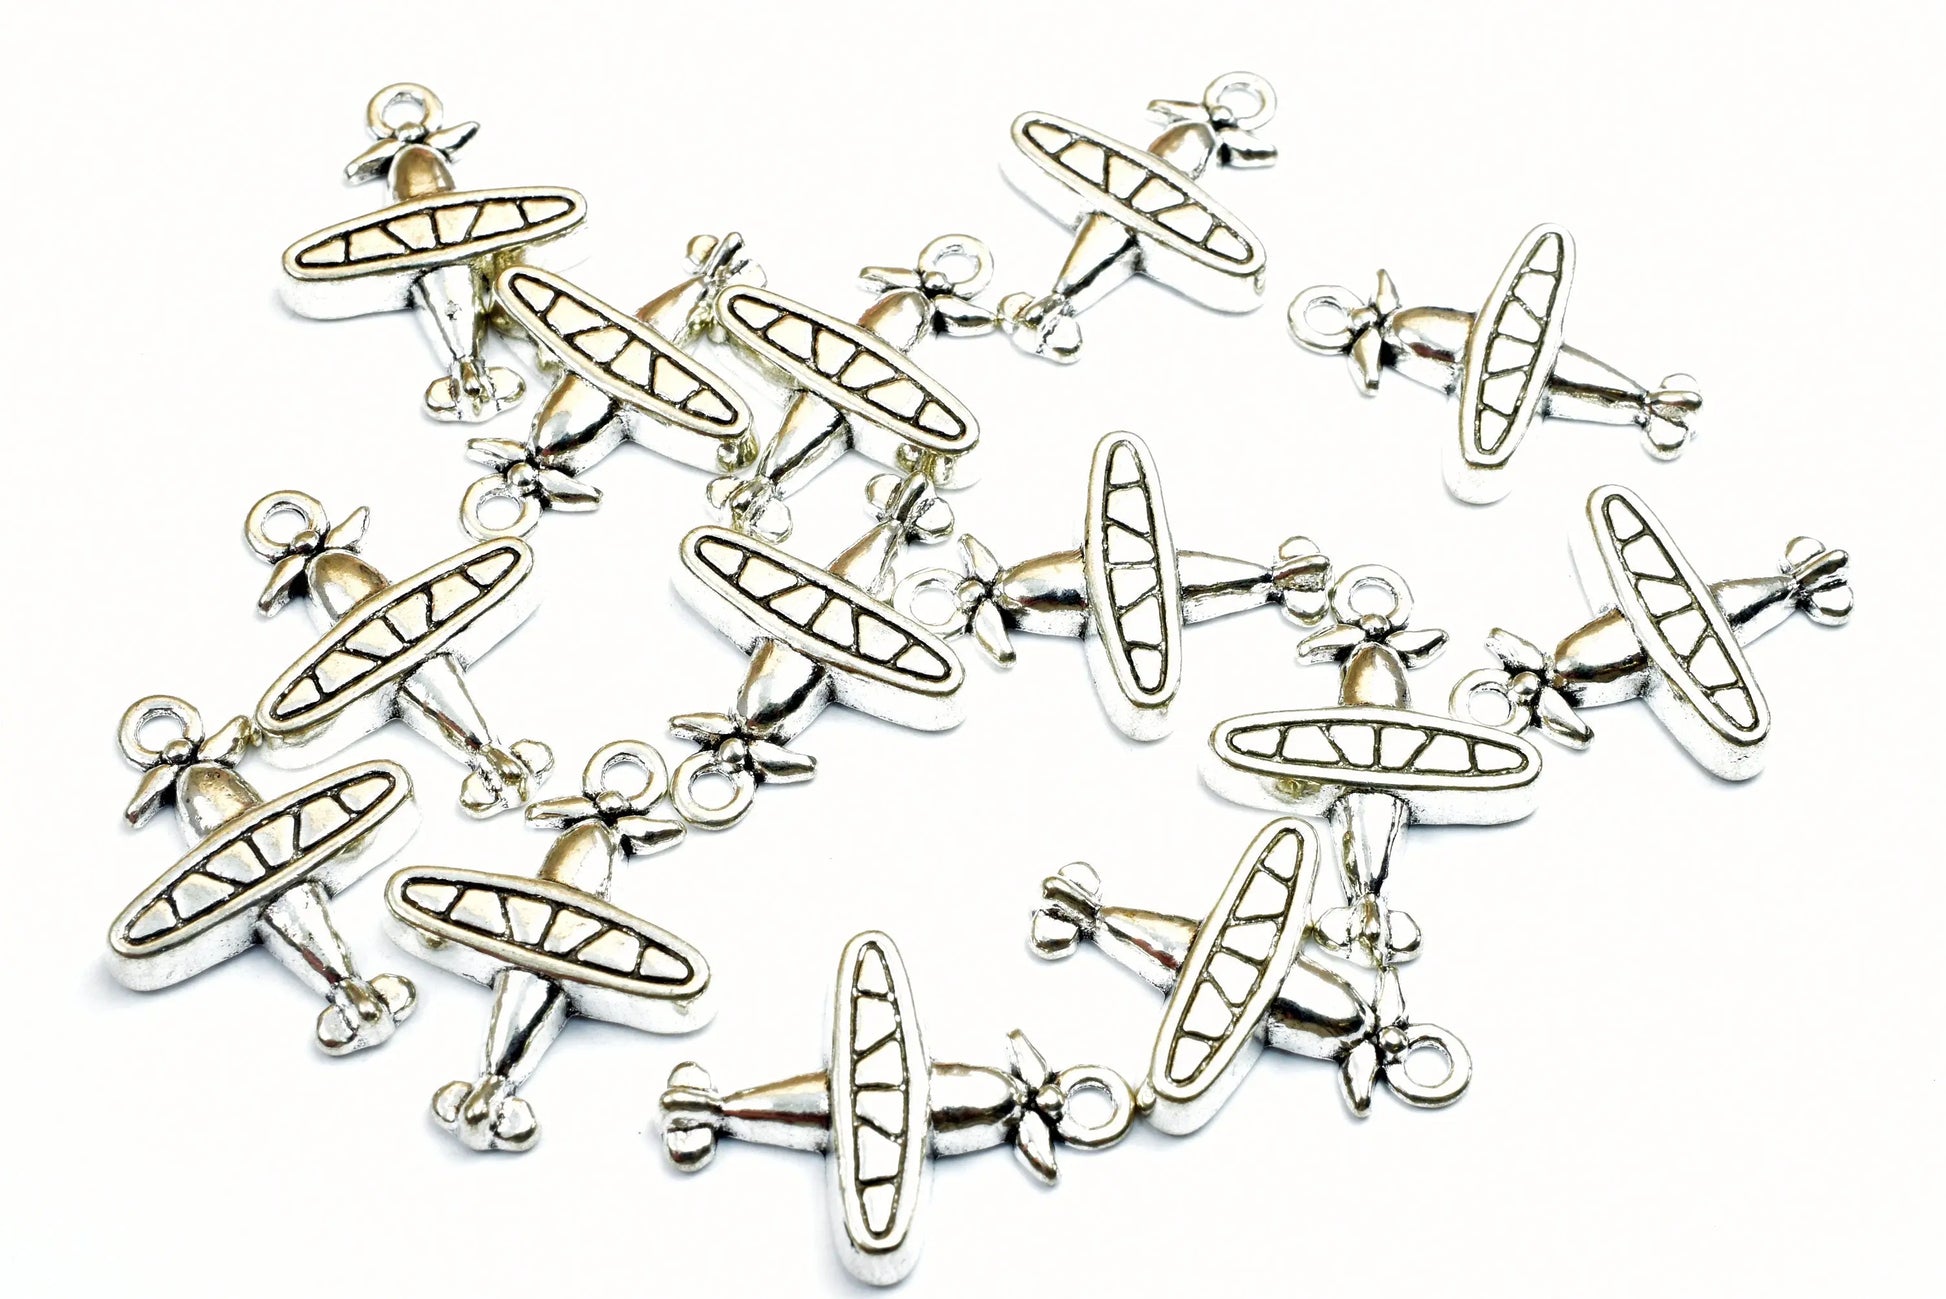 14PCs Airplane Charm Size 21x16mm Antique Tibetan Silver Tone Finding Alloy Charm Pendant Finding For Jewelry Making - BeadsFindingDepot